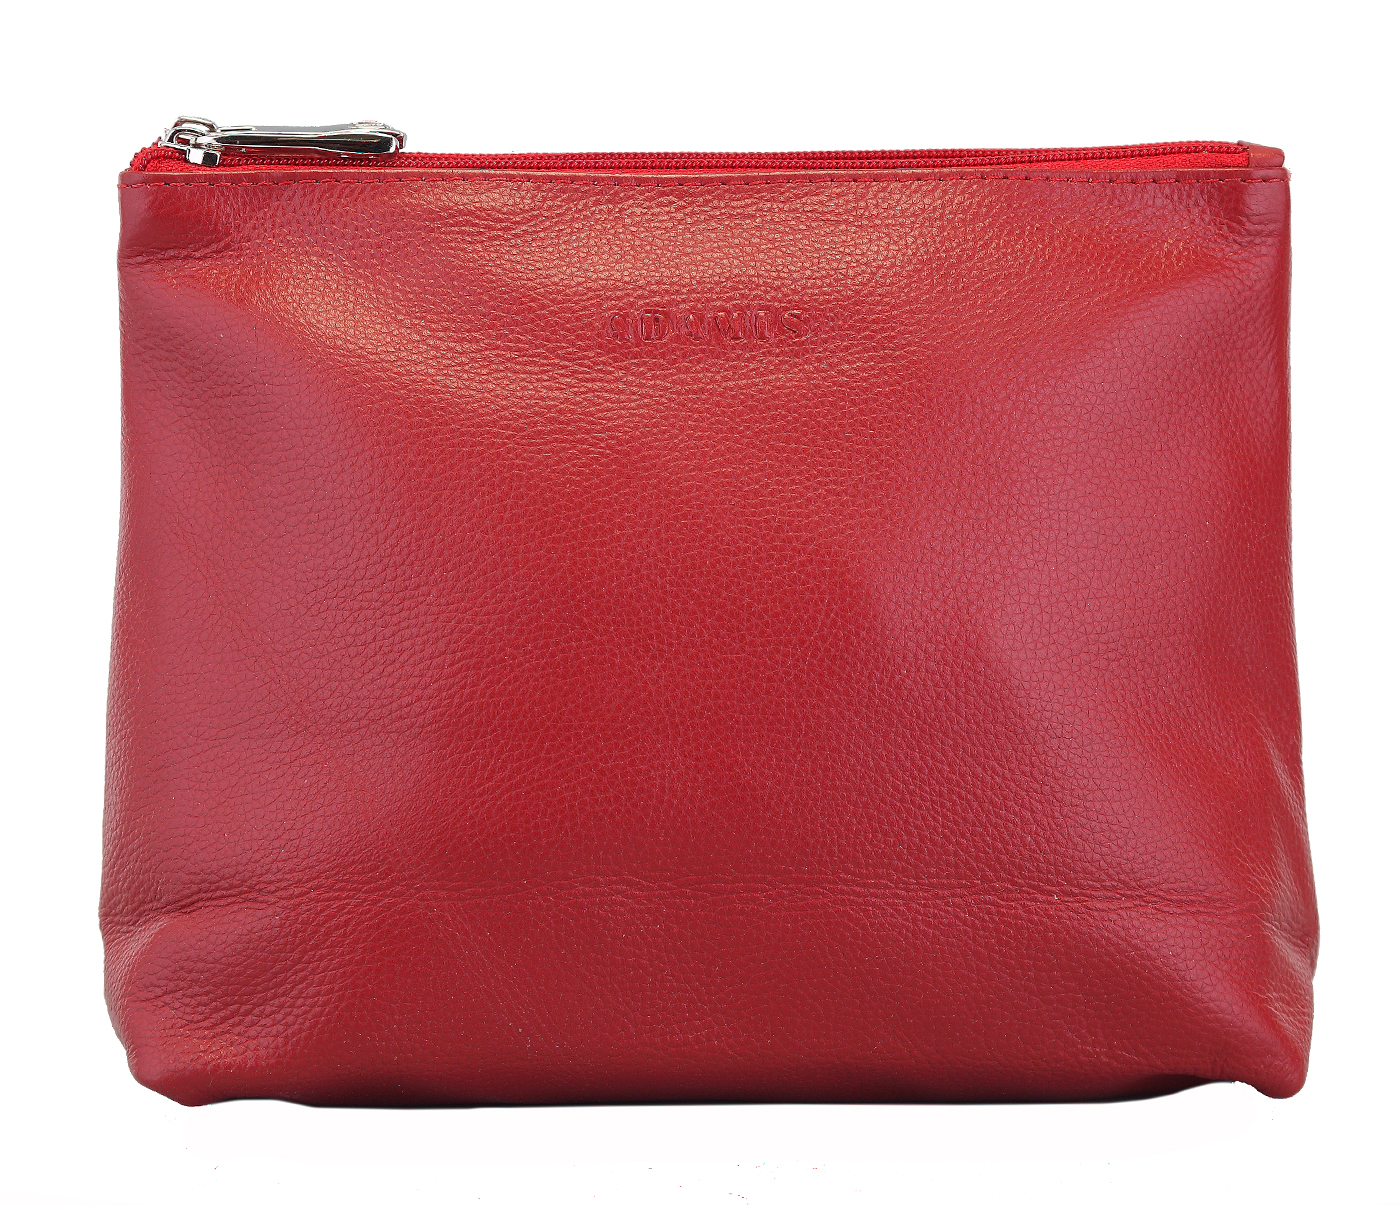 P18--Unisex Wash And Toiletry Bag in Genuine Leather - Red